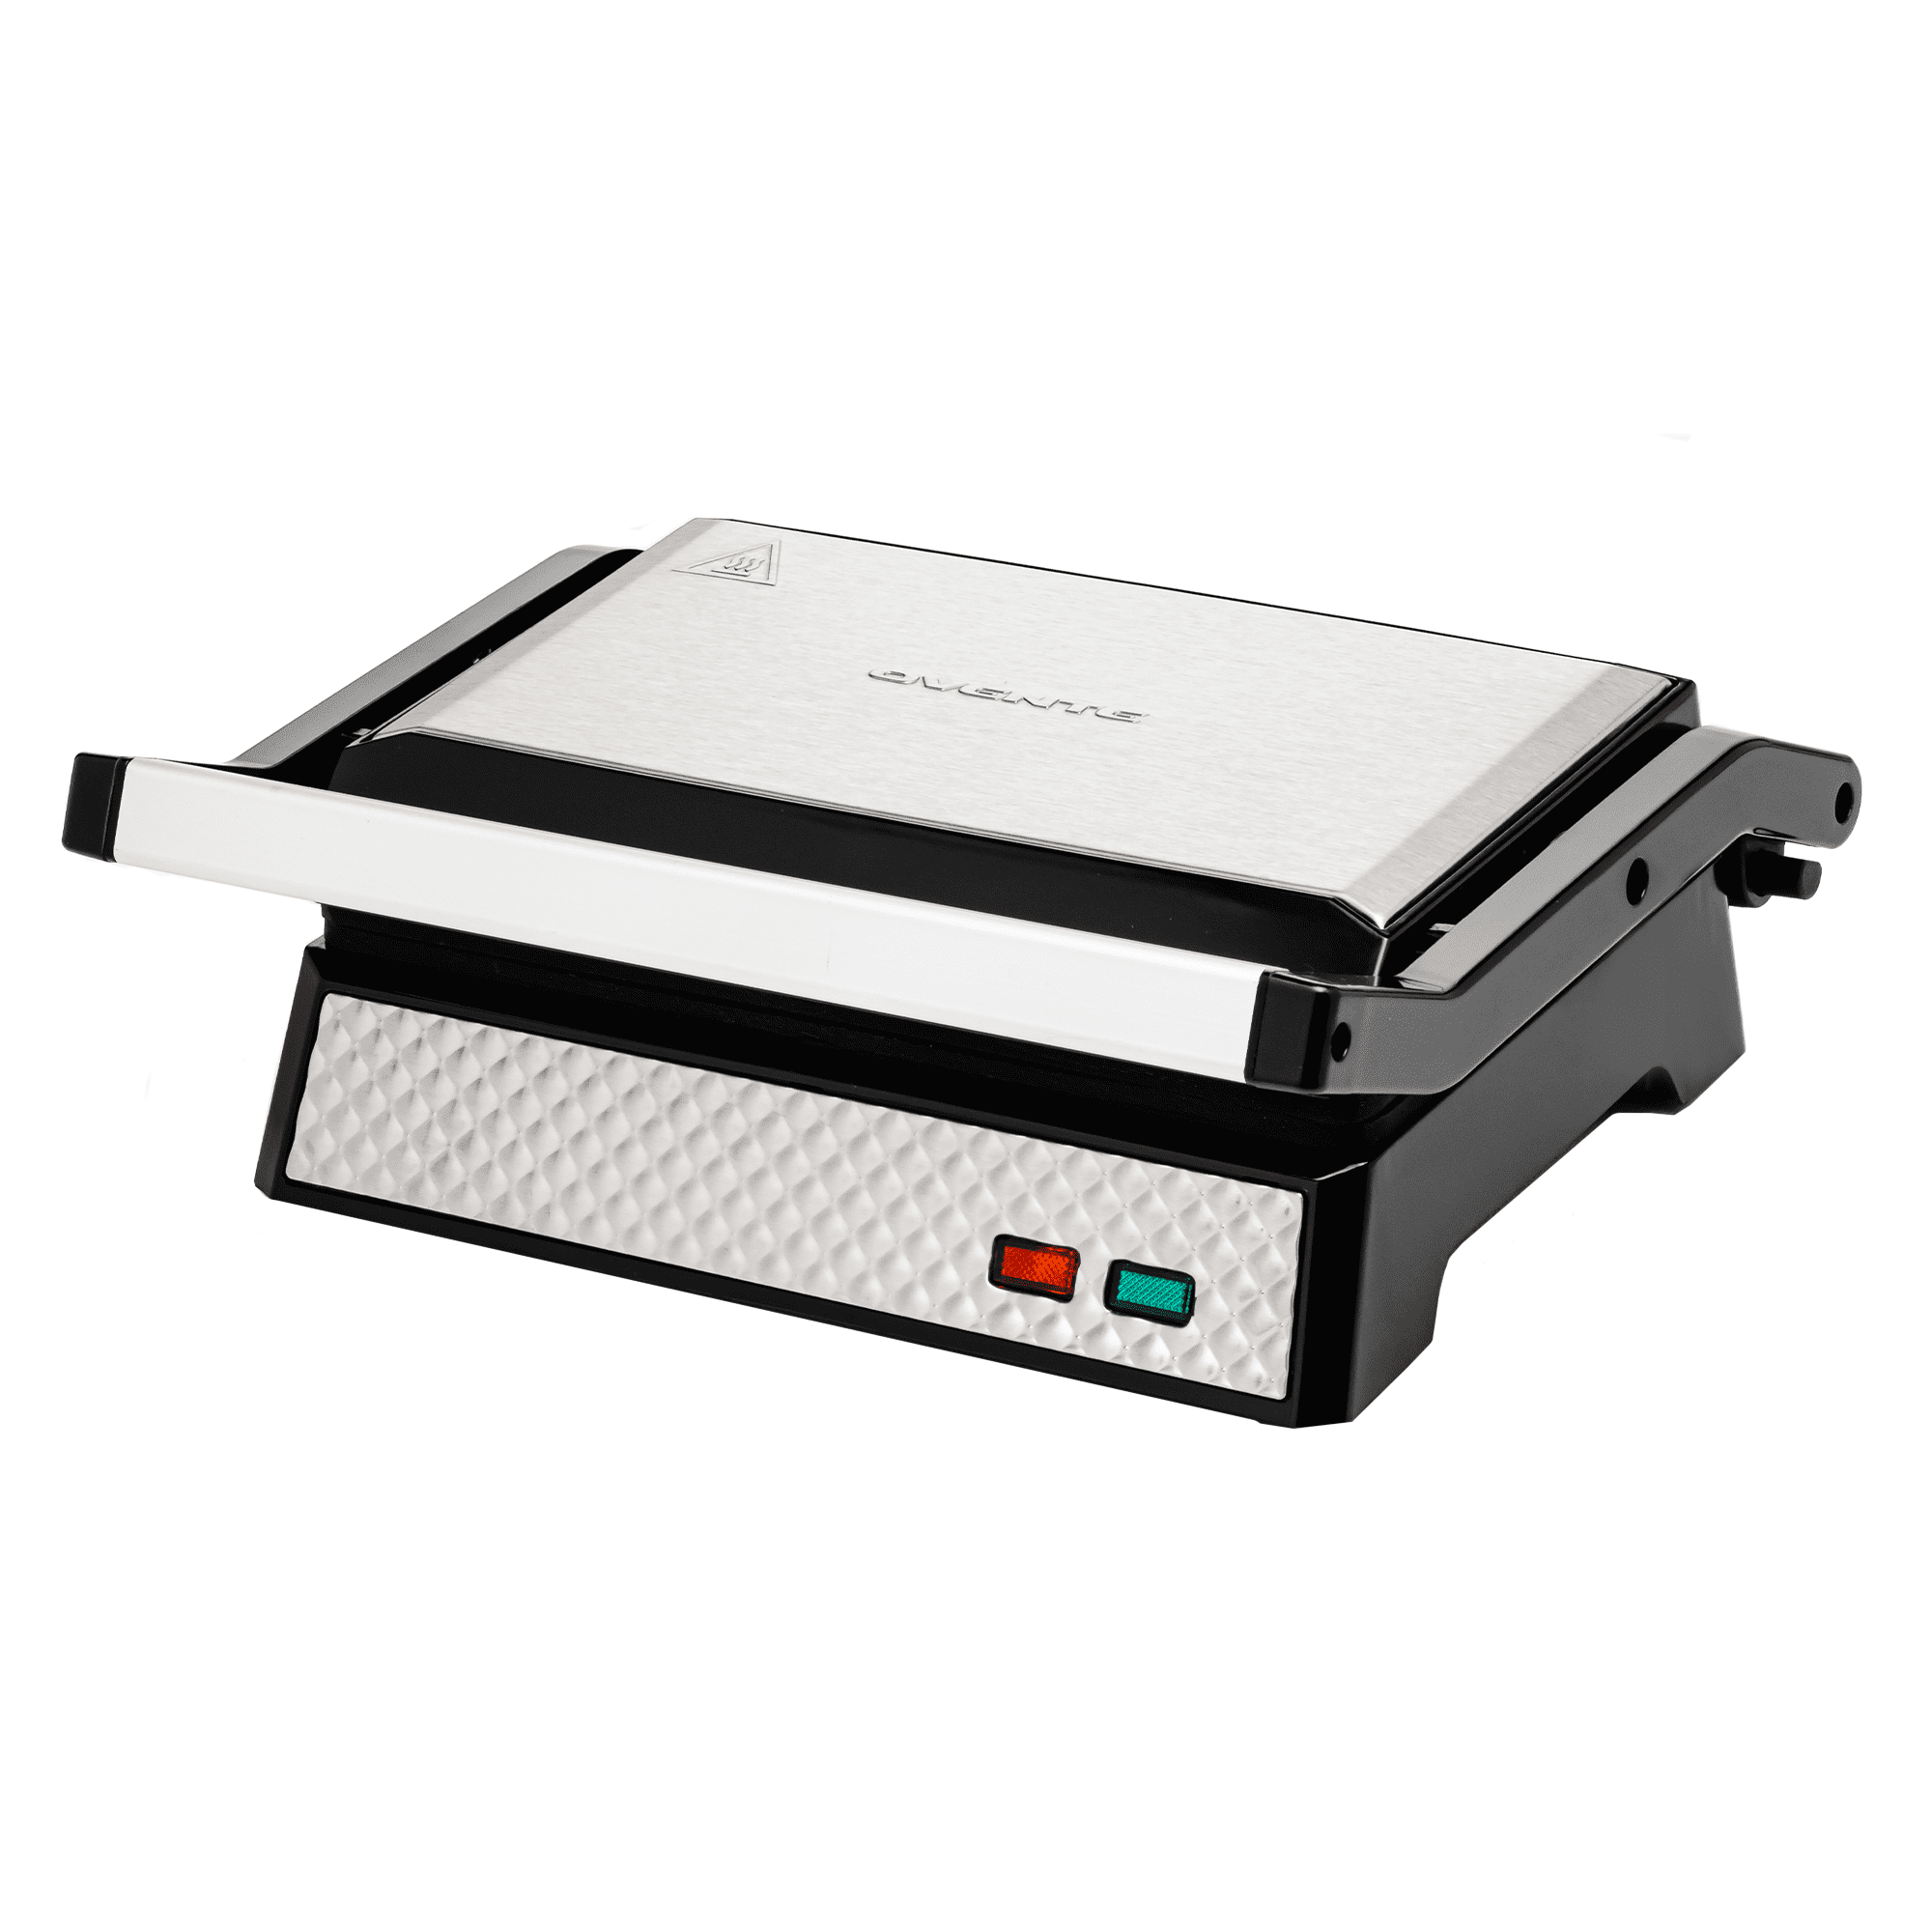 Hamilton Beach Panini Press Sandwich Maker & Electric Indoor Grill with  Locking Lid, Opens 180 Degrees for any Thickness for Quesadillas, Burgers 